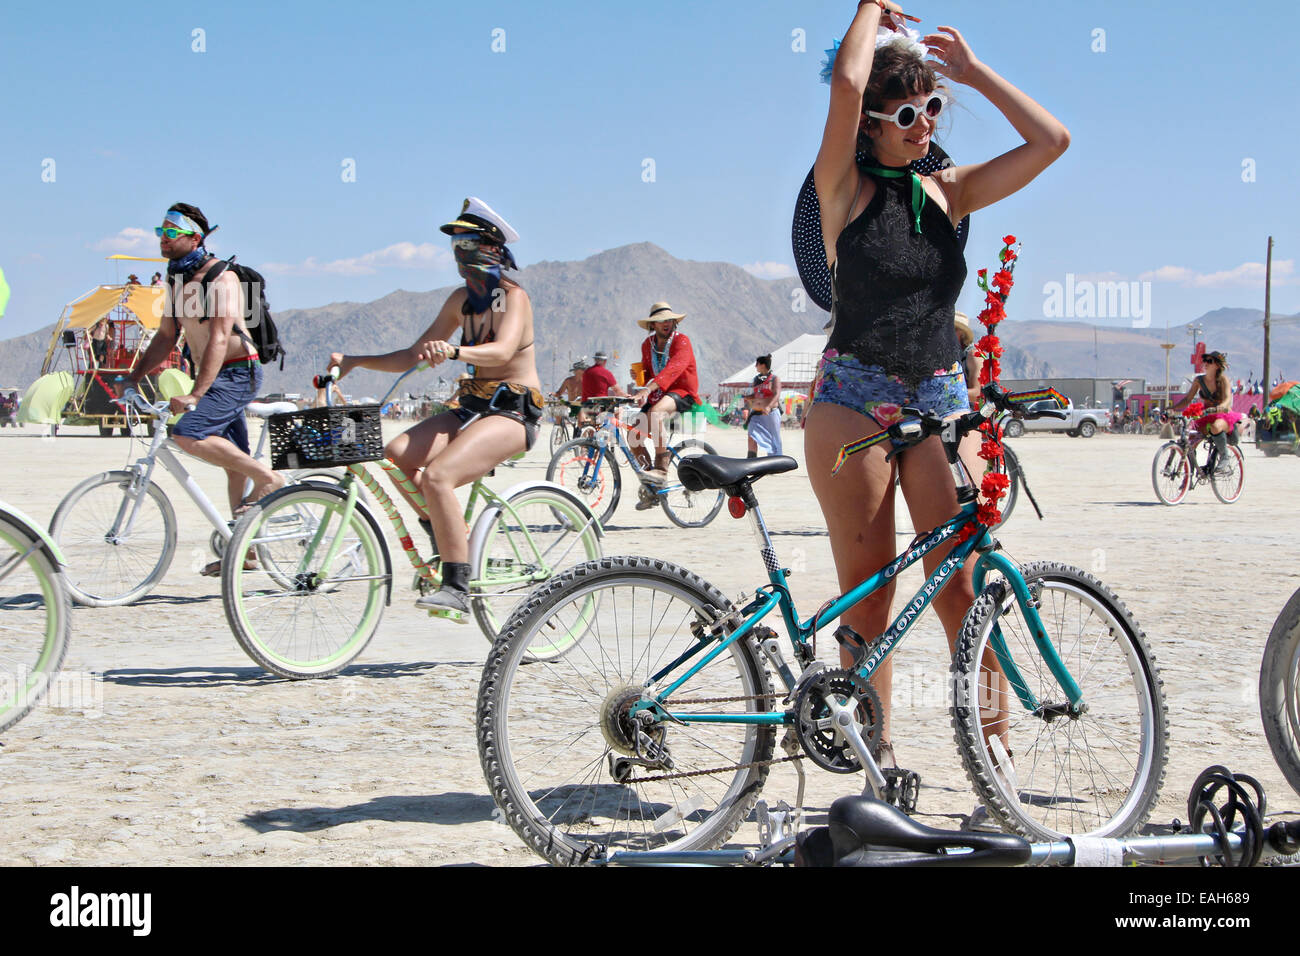 Bicyclists on the playa at the annual Burning Man festival in the desert August 26, 2014 in Black Rock City, Nevada. Stock Photo